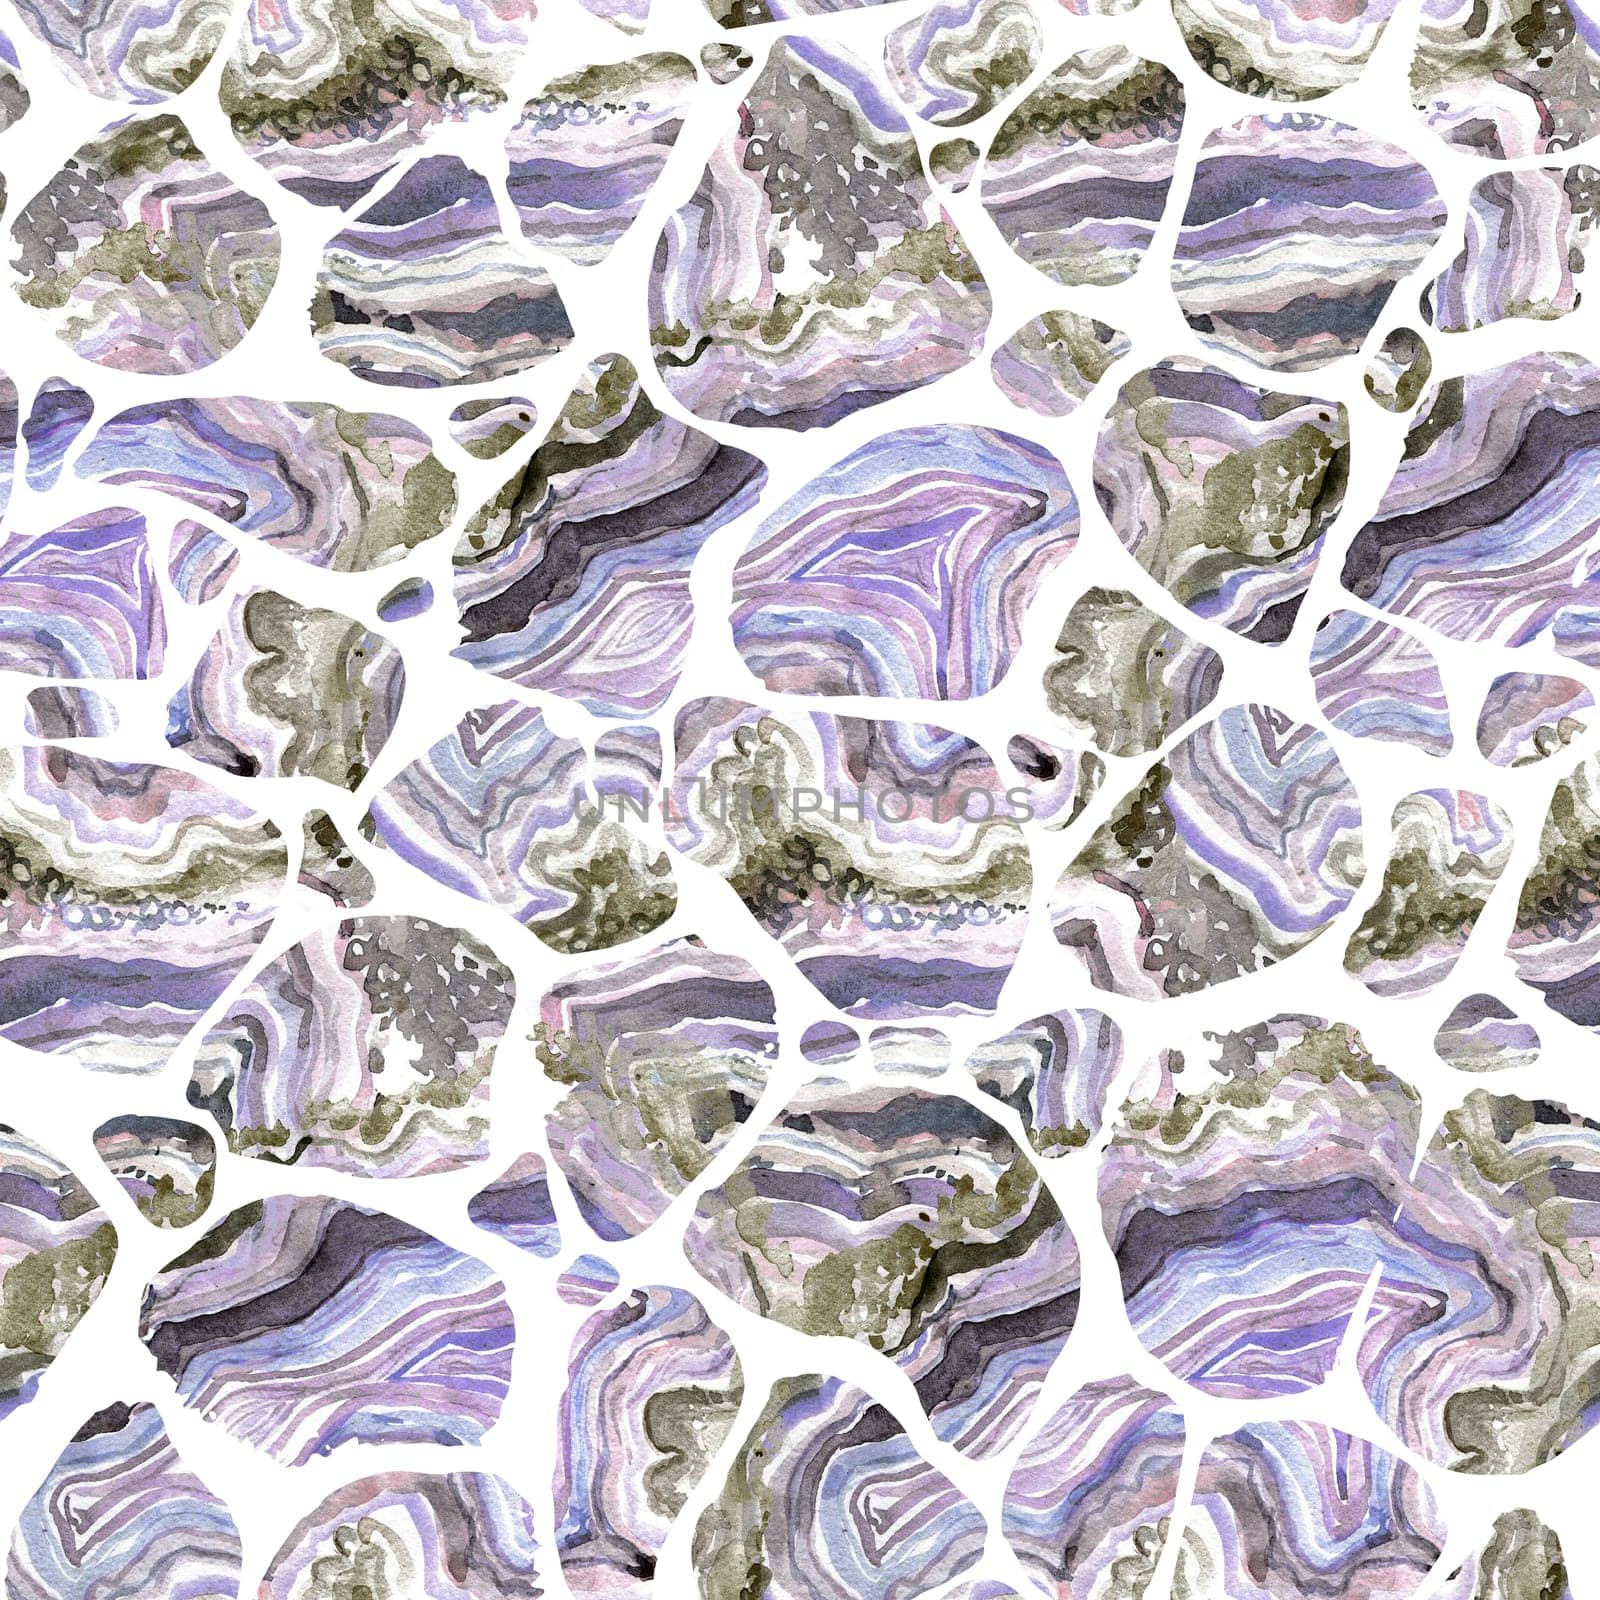 Modern seamless pattern with the texture of the layered Onyx mineral stone in watercolor imitation for textiles and surfaces design